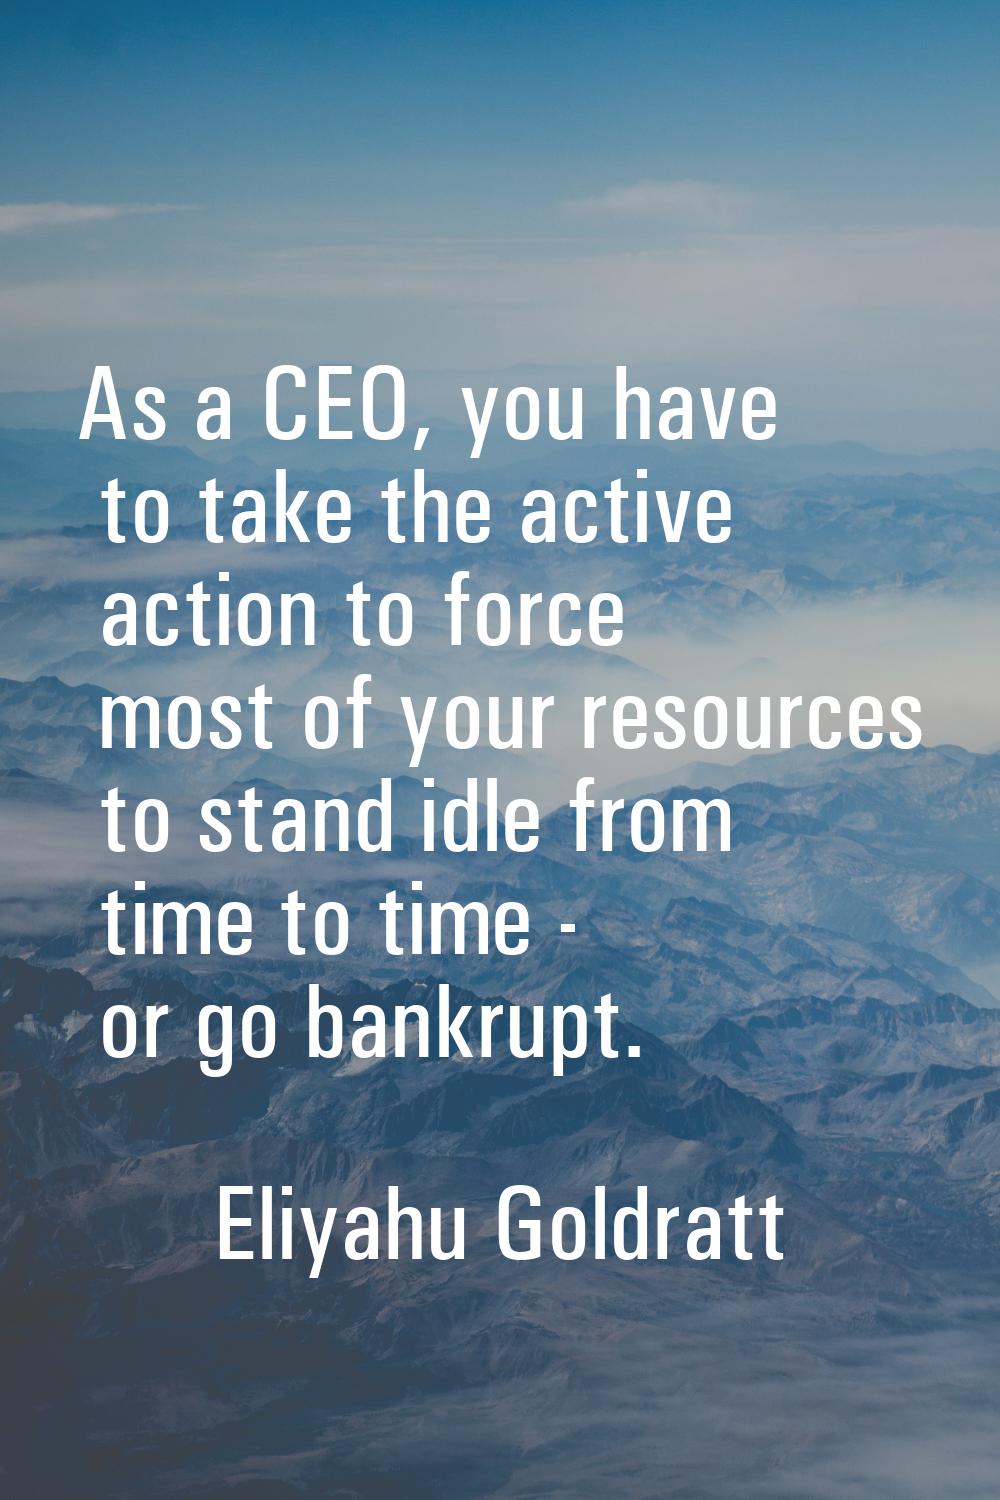 As a CEO, you have to take the active action to force most of your resources to stand idle from tim